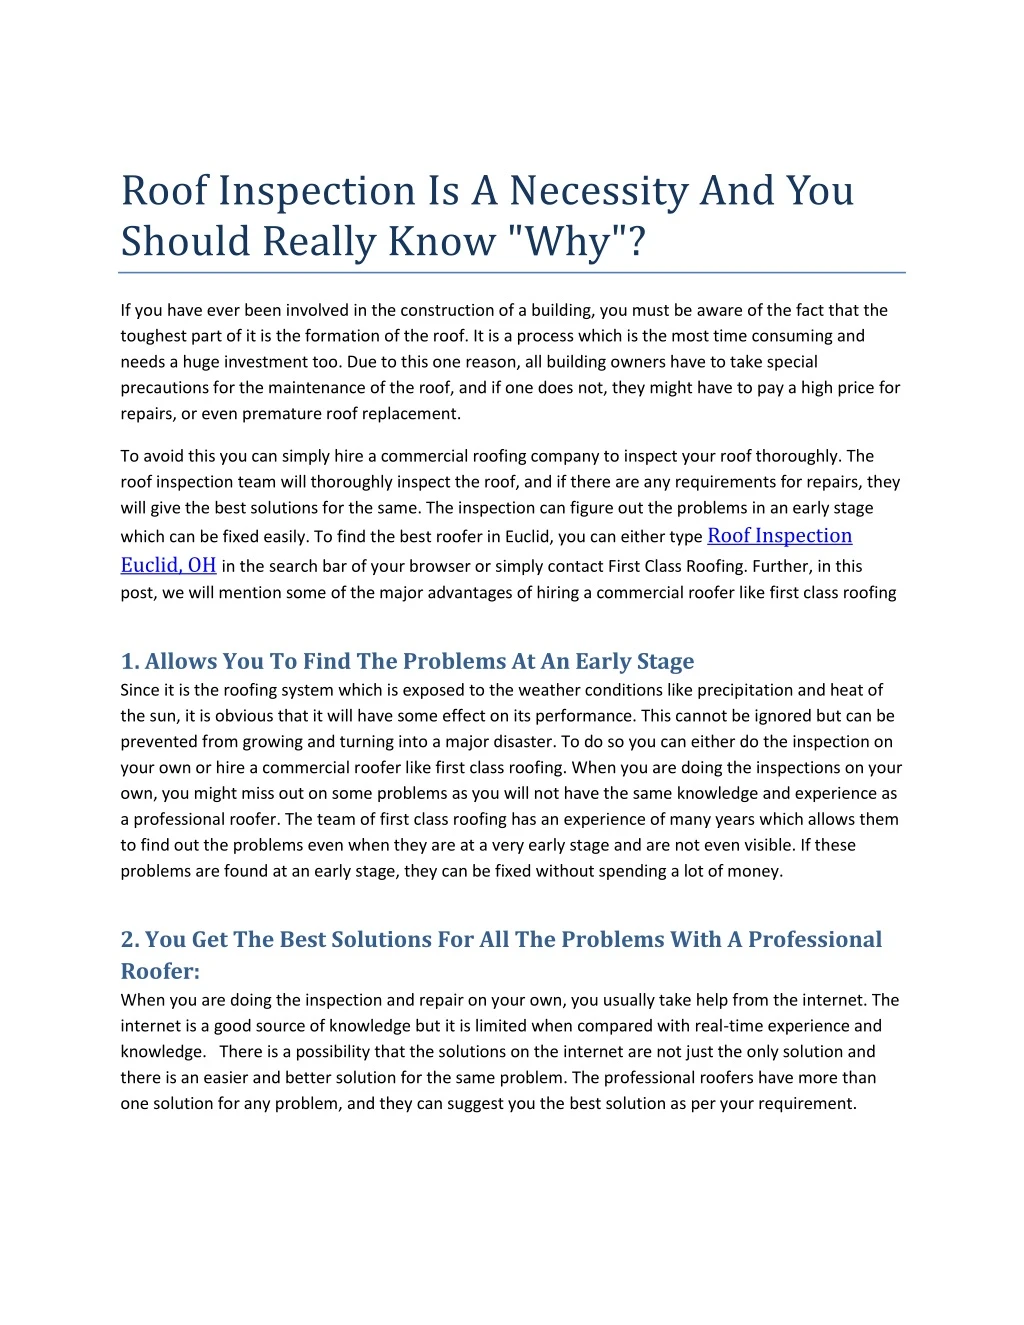 roof inspection is a necessity and you should